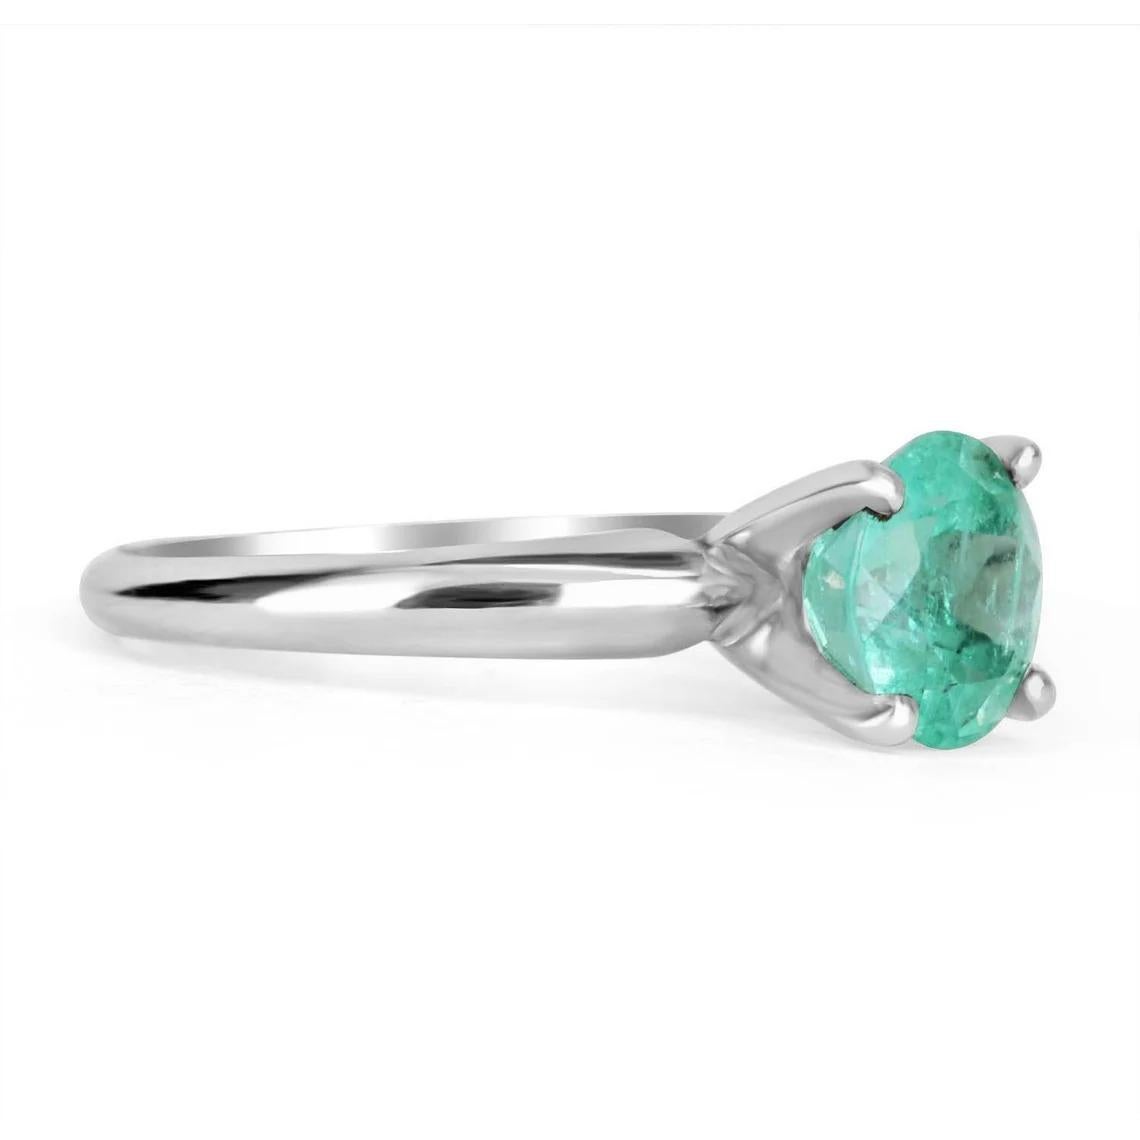 Displayed is a classic Colombian emerald solitaire, round-cut, timeless engagement ring in solid 14K gold. This gorgeous solitaire ring carries a full 2.24-carat emerald in a four-prong setting. Fully faceted, this gemstone showcases excellent shine